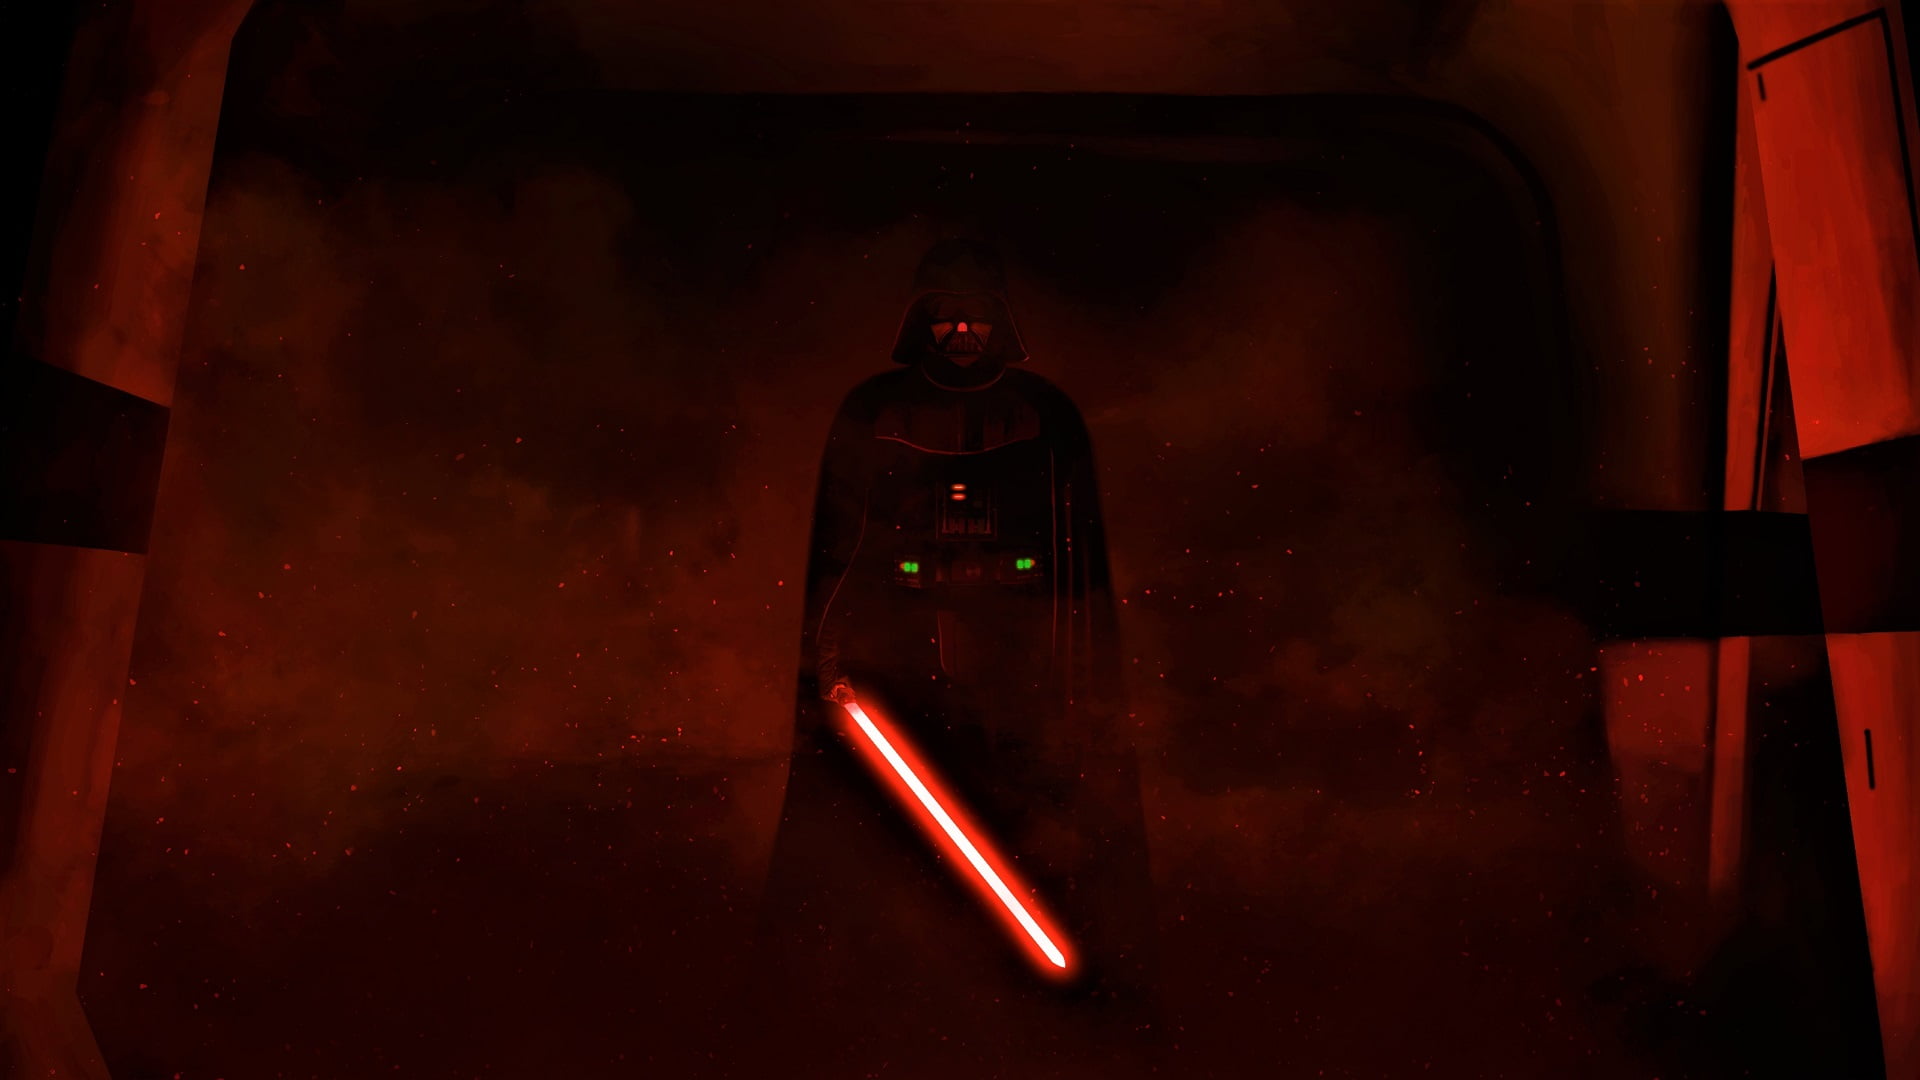 Star Wars character holding red lightsaber